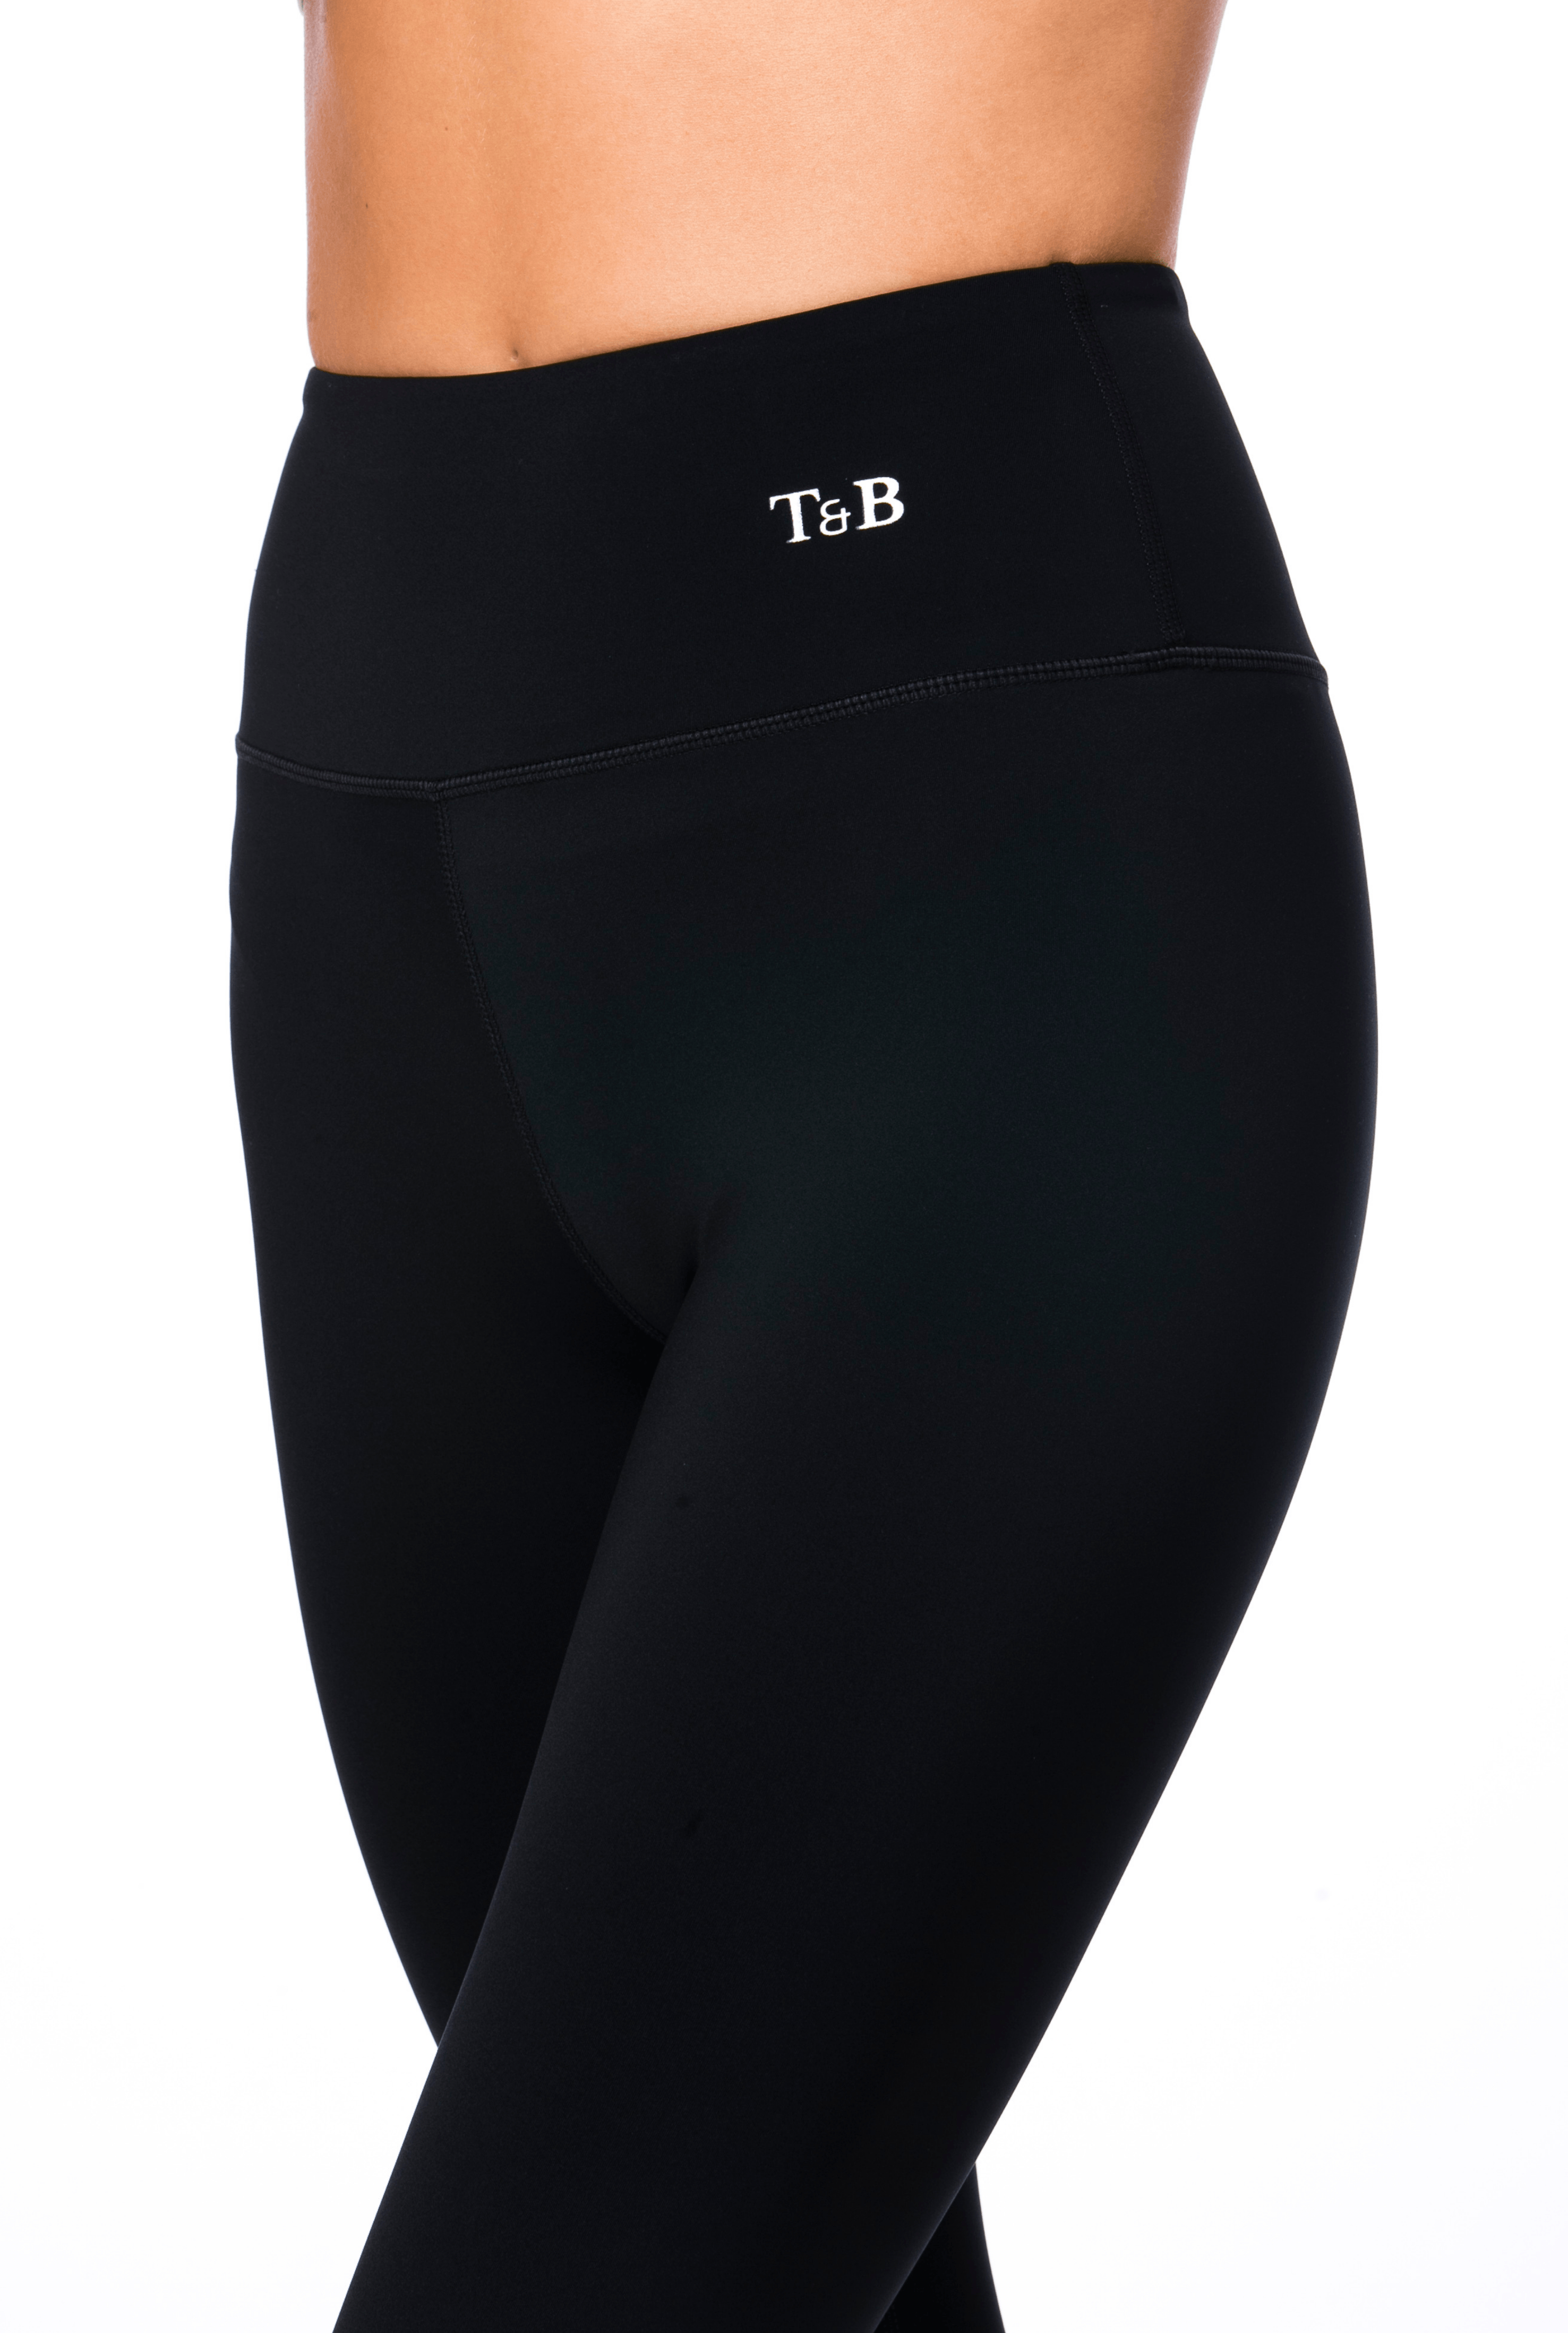 Trendy & Bendy high waisted 7/8 black legging made with recycled material will flatter and accentuate your legs. You will love the "scuba" feel of the fabric, which provides you with that extra support and comfort. The Kim leggings are ideal for are ideal for yoga or Pilates or just for a stylish everyday look. 